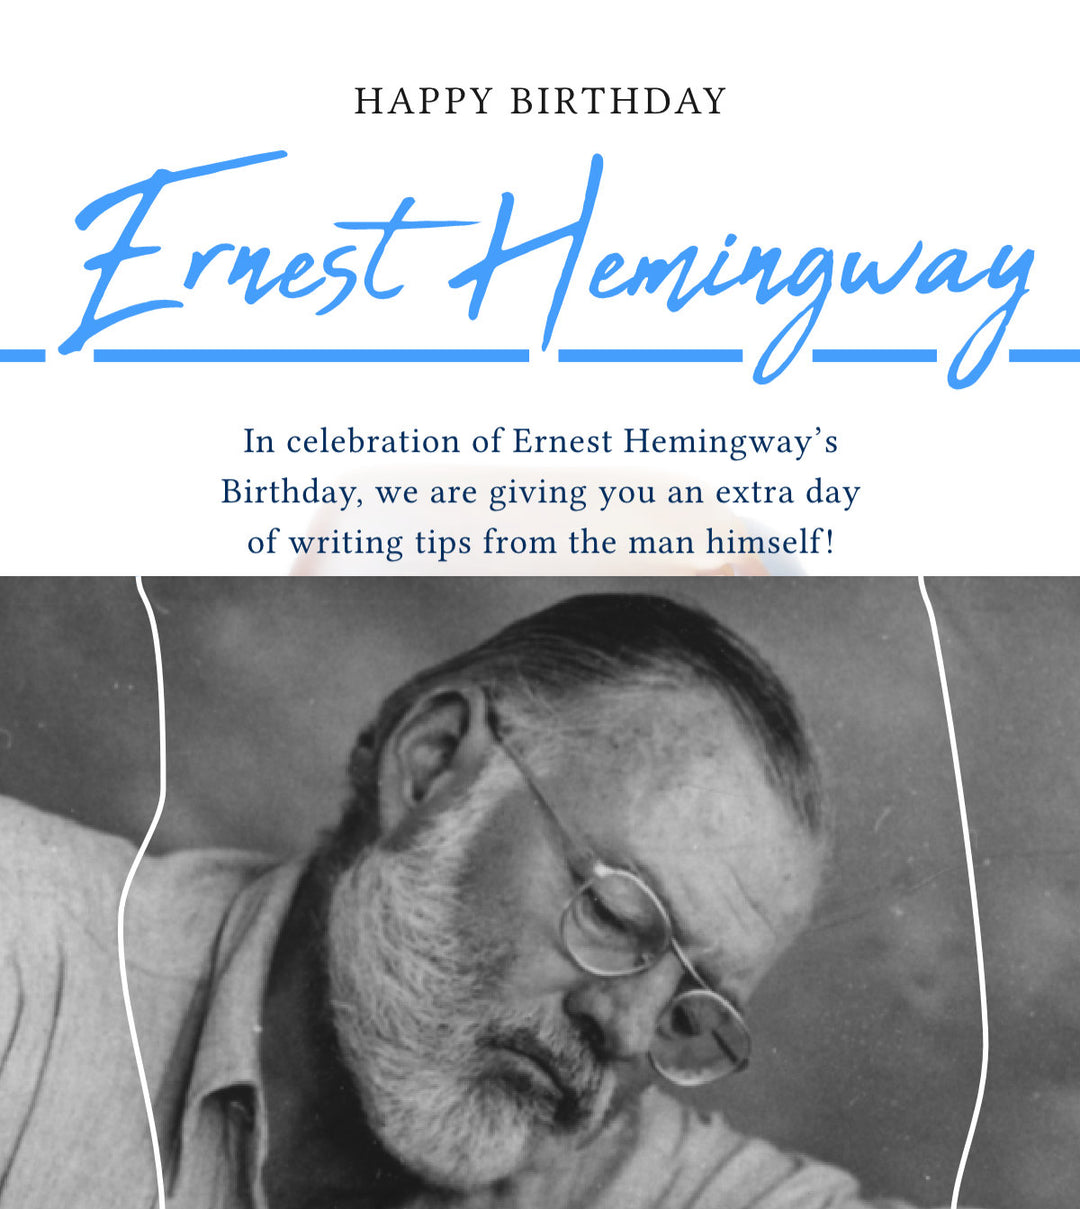 Happy Birthday Ernest Hemingway - In celebration of Ernest Hemingway's Birthday, we are giving you an extra day of writing tips from the man himself! (Pictured: Black and white photo of author Ernest Hemingway.)